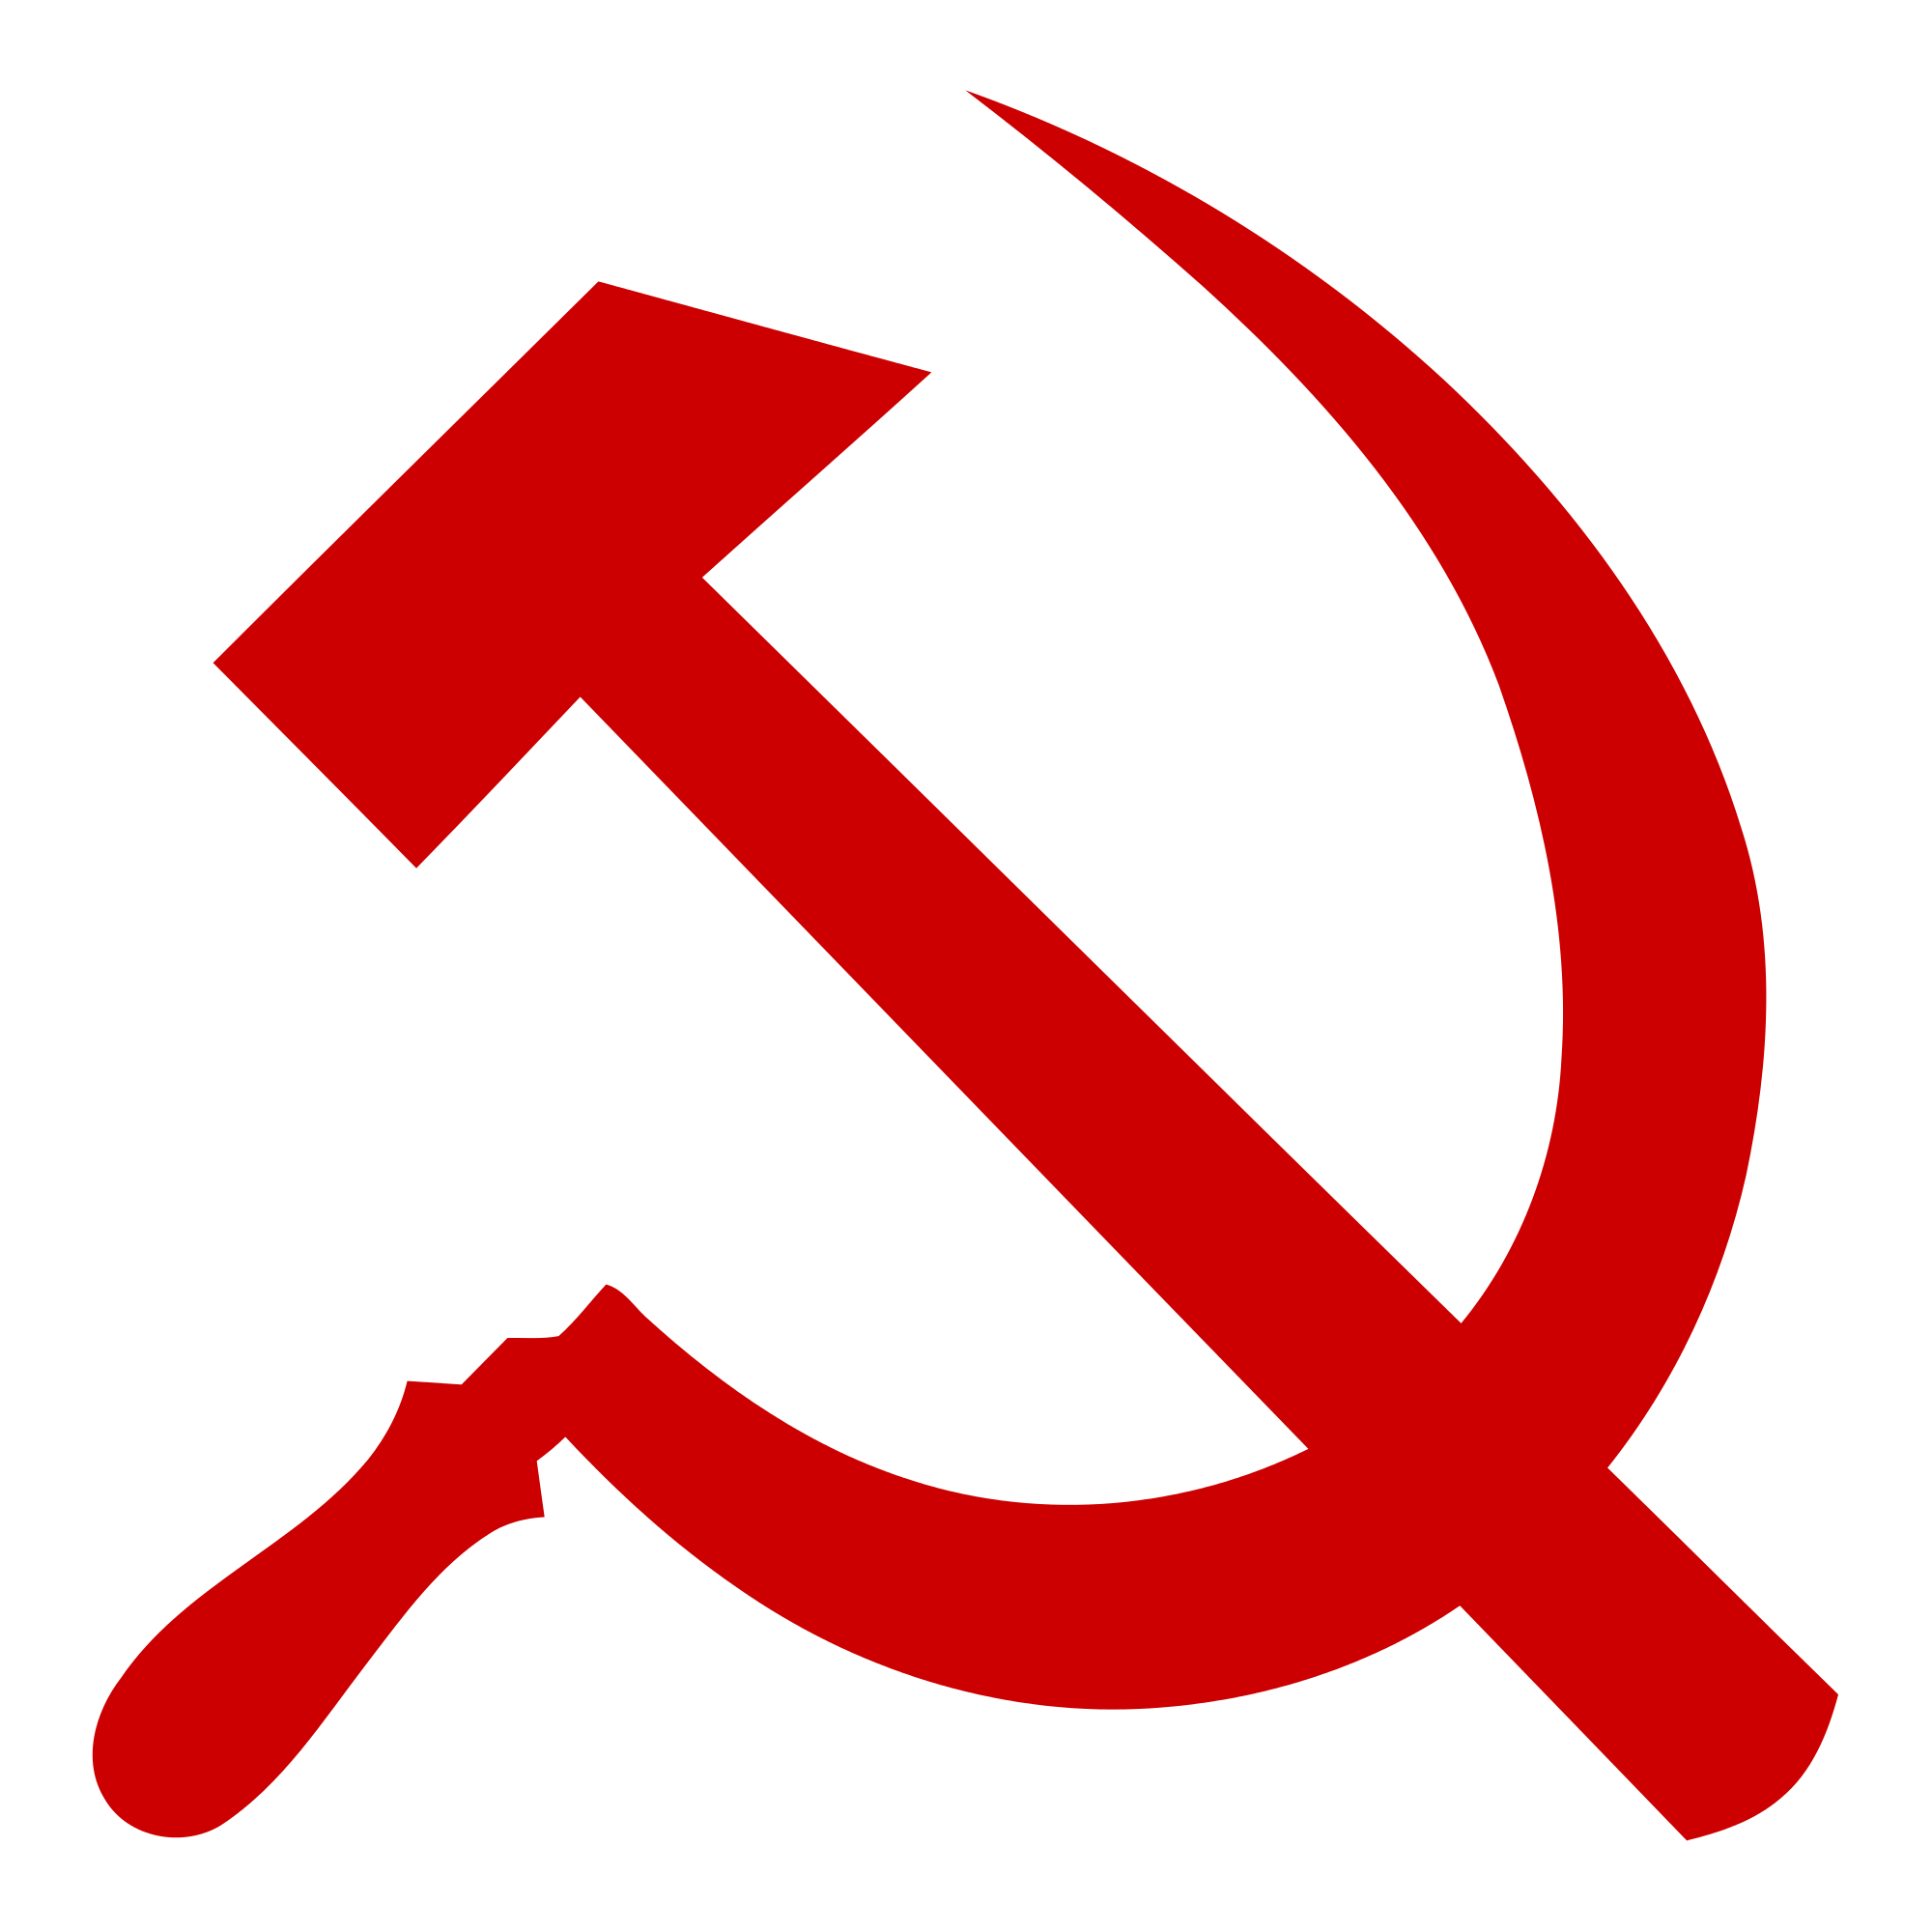 2000px-Hammer_and_sickle_red_on_transparent.svg.png